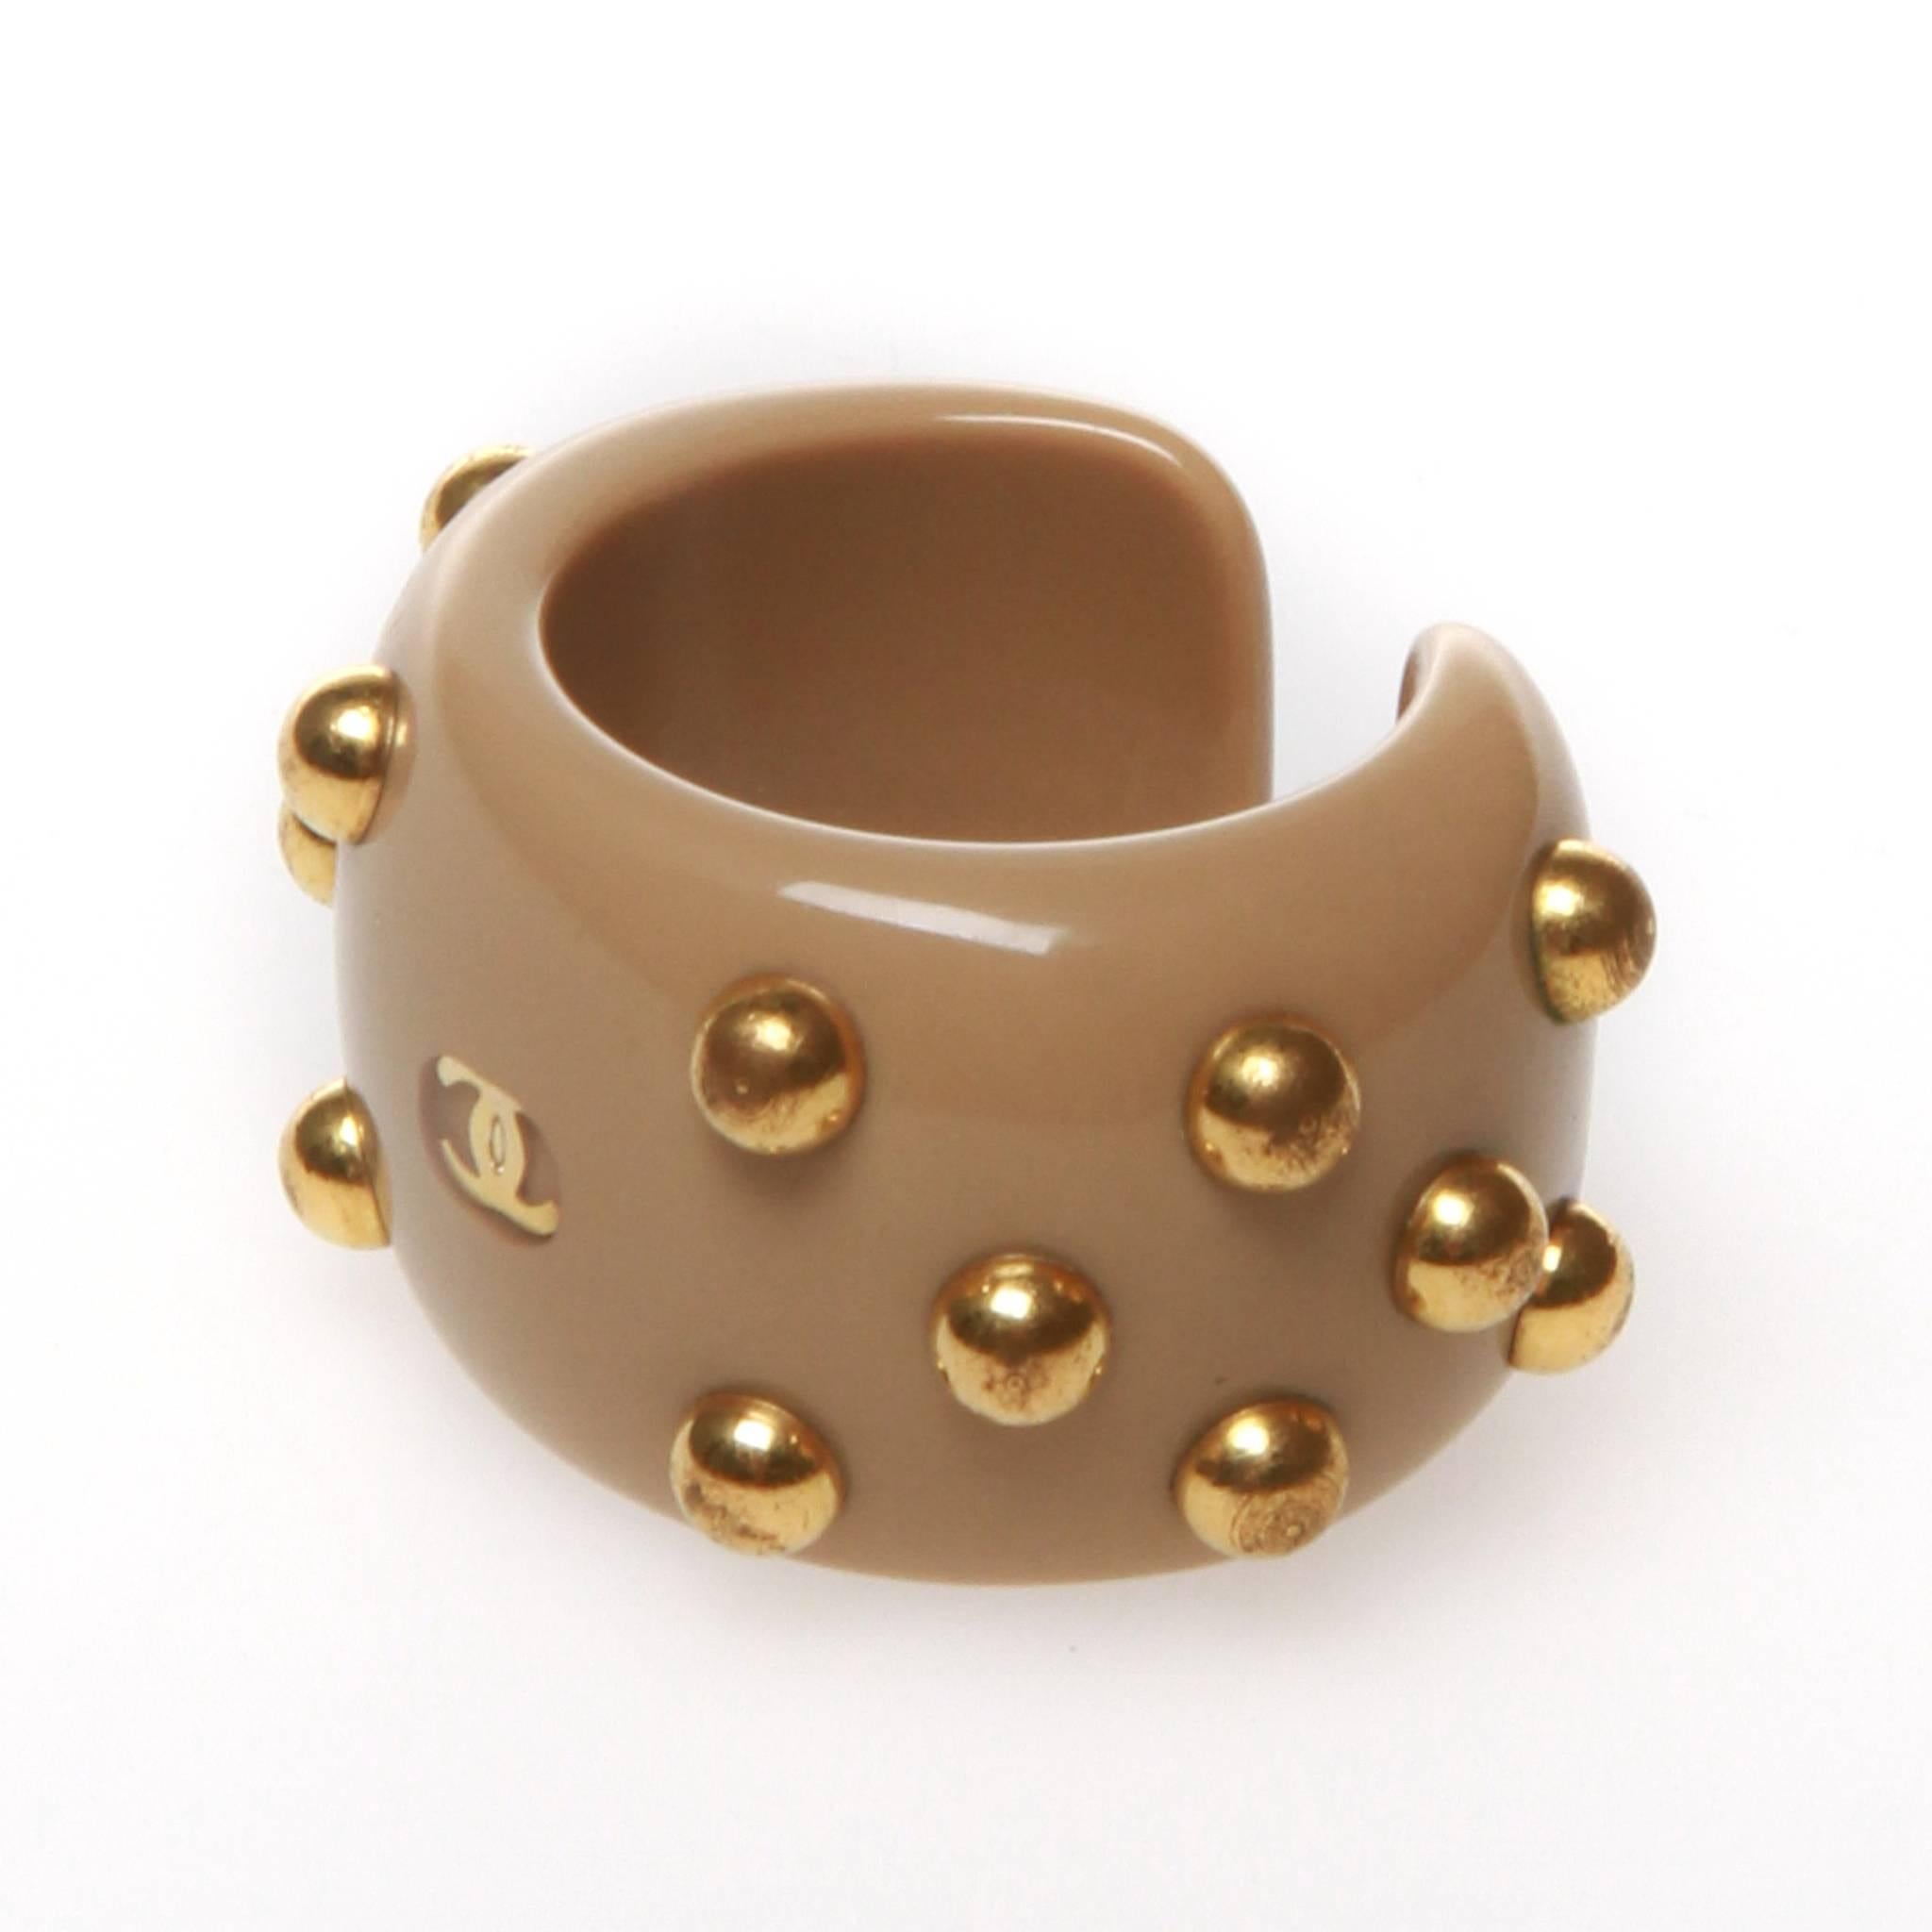 Chanel ring in beige resin with gold-tone metal studs throughout and central interlocking CC. 

Size M. 